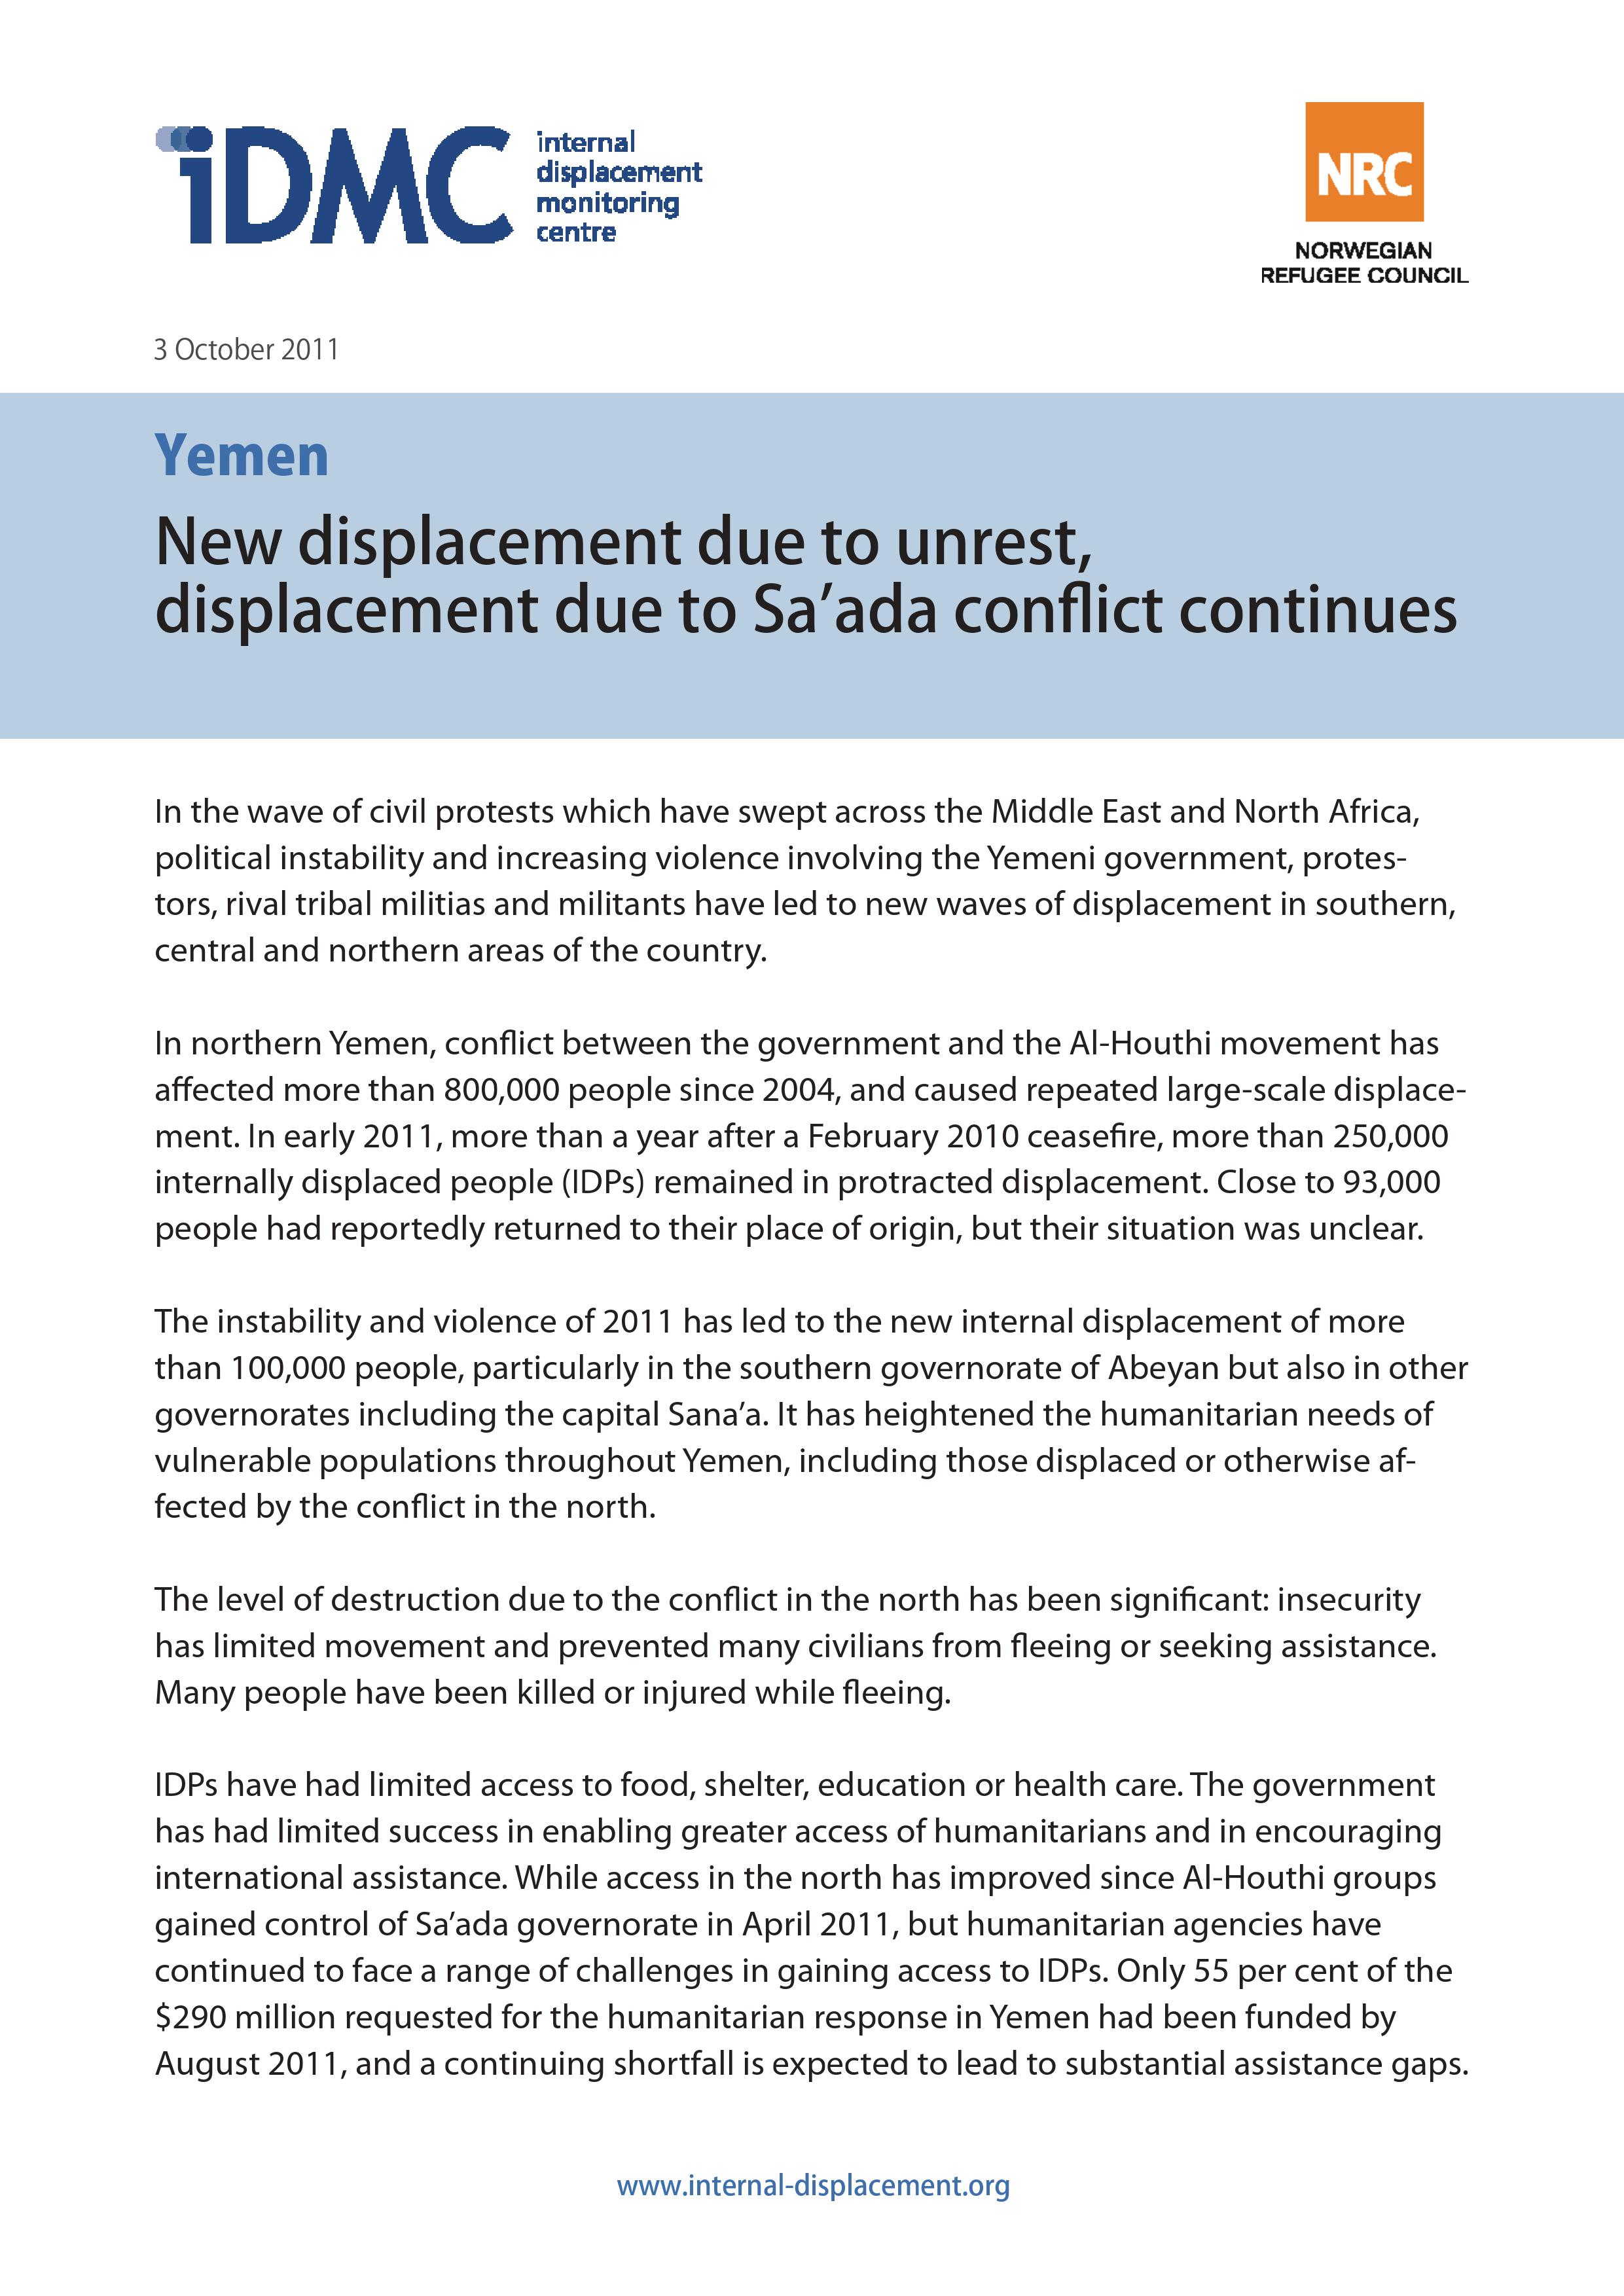 New displacement due to unrest, displacement due to Sa’ada conflict continues